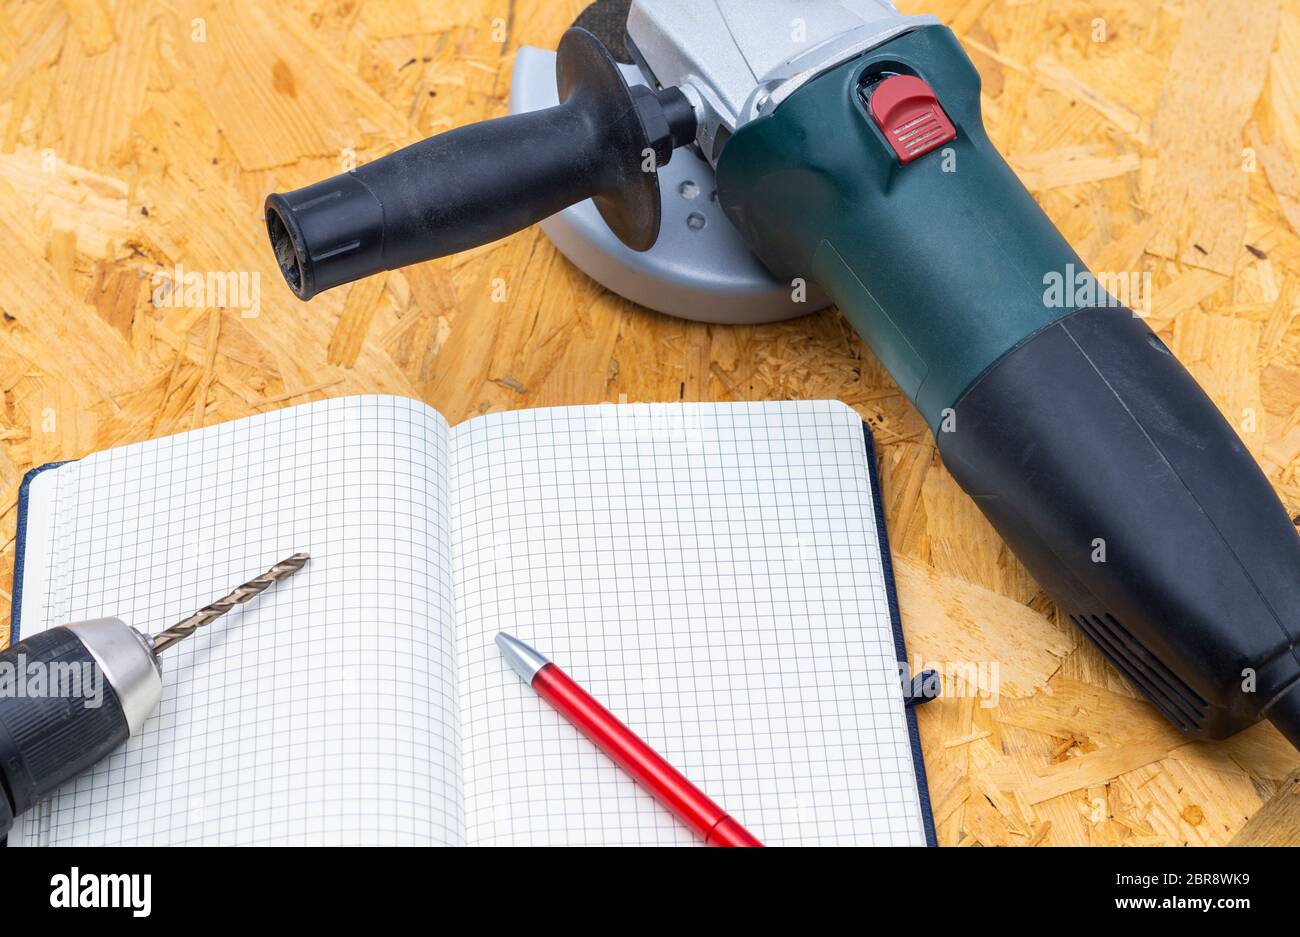 The image shows an angle grinder with a driller and notebook on a wooden table Stock Photo